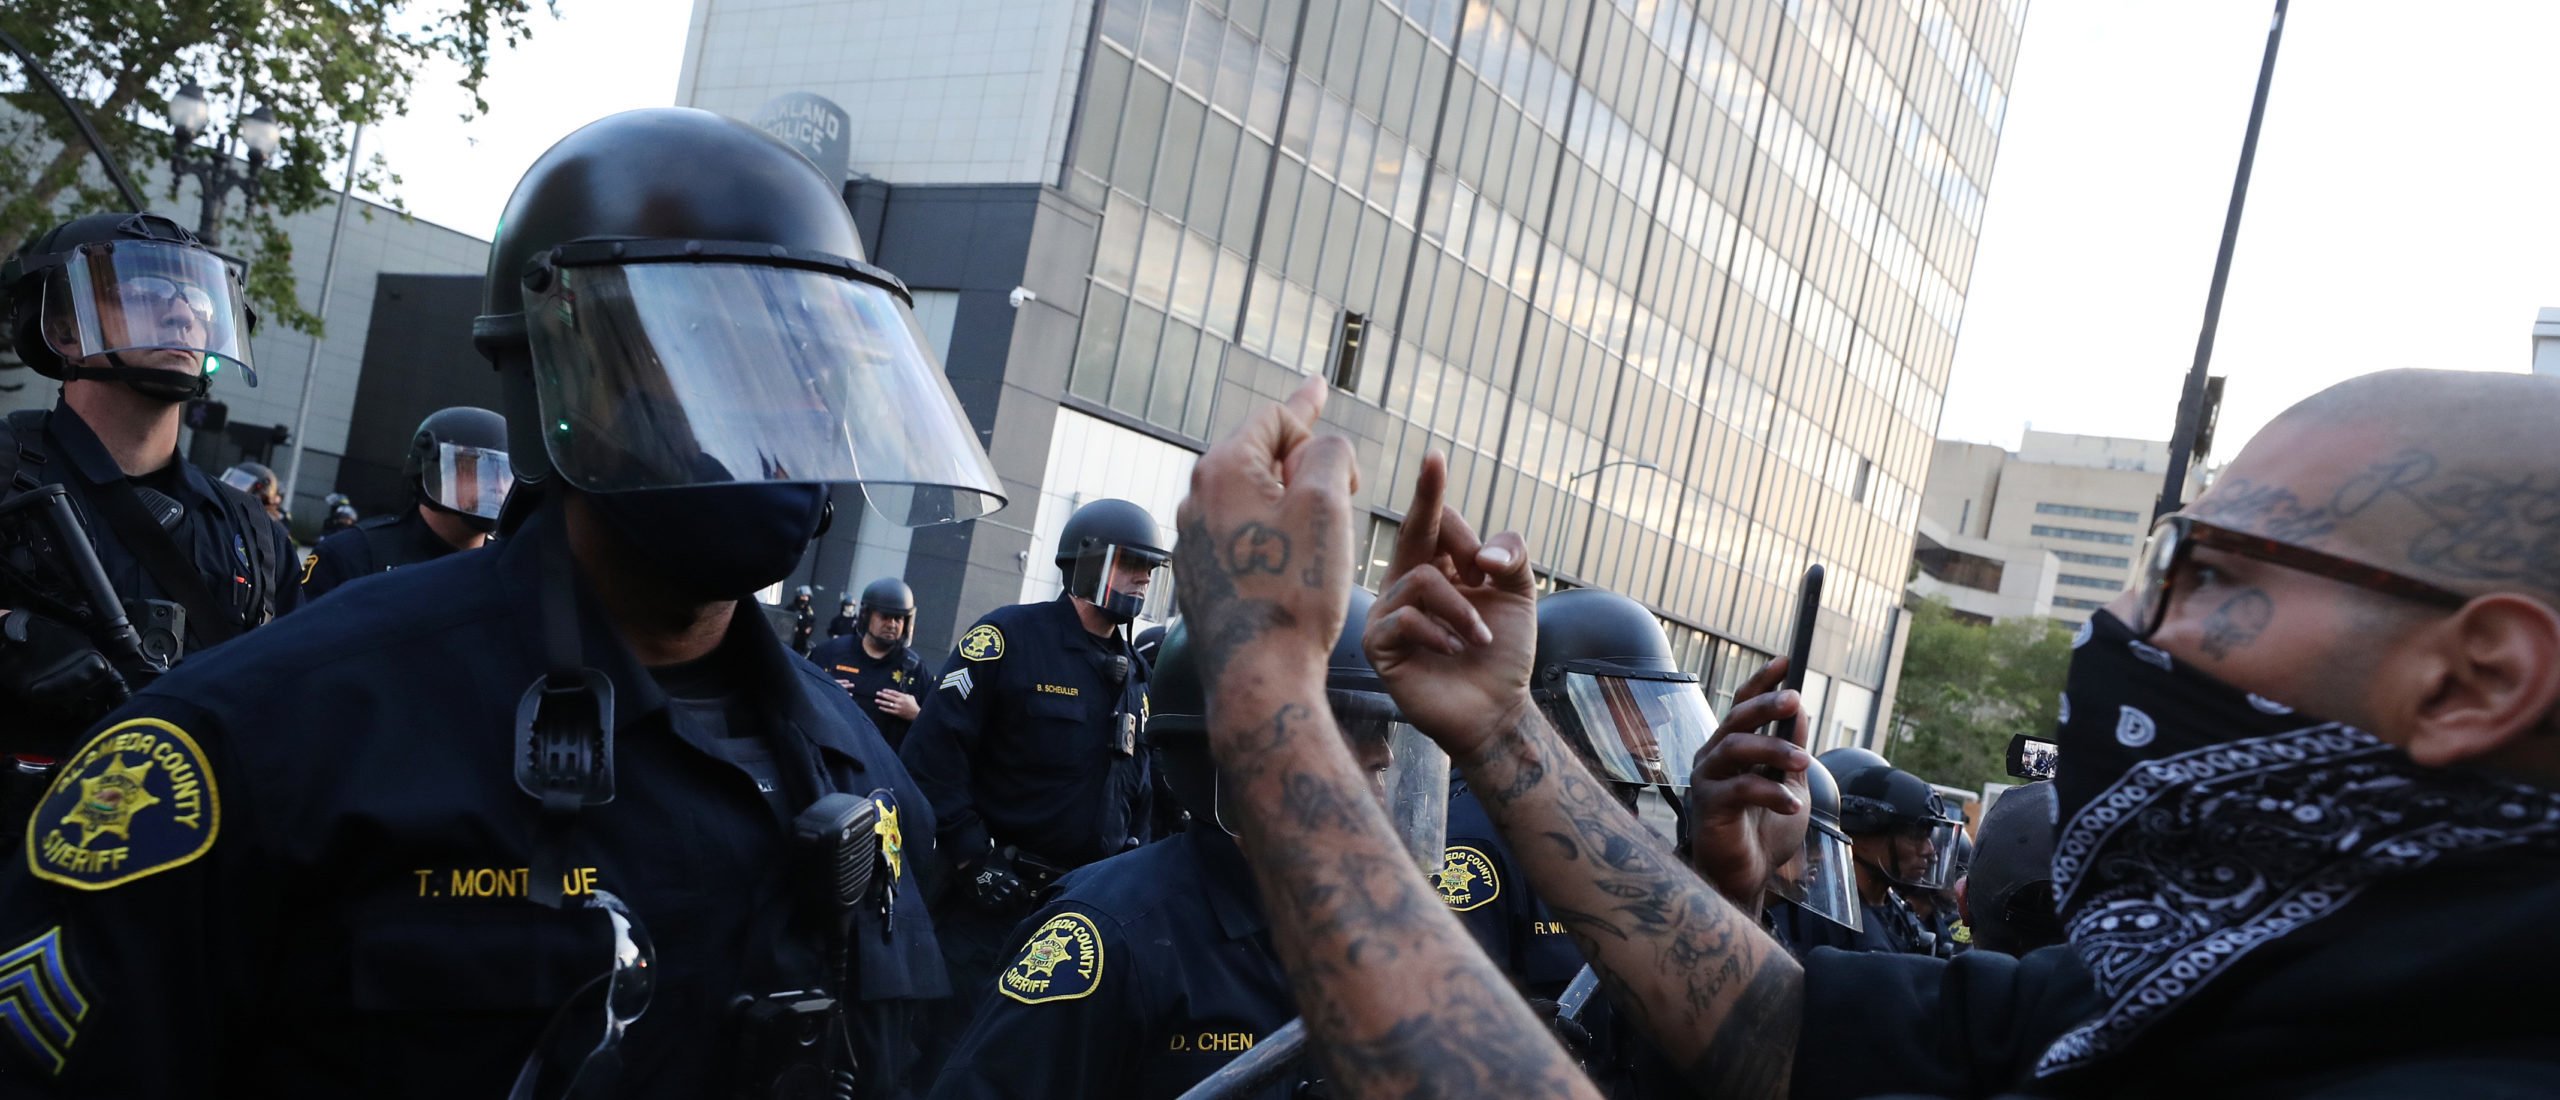 A man a conveys his message to police during a protest sparked by the death of George Floyd while in police custody on May 29, 2020 in Oakland, California. Earlier today, former Minneapolis police officer Derek Chauvin was taken into custody for Floyd's death. Chauvin has been accused of kneeling on Floyd's neck as he pleaded with him about not being able to breathe. Floyd was pronounced dead a short while later. Chauvin and 3 other officers, who were involved in the arrest, were fired from the police department after a video of the arrest was circulated. (Photo by Justin Sullivan/Getty Images)